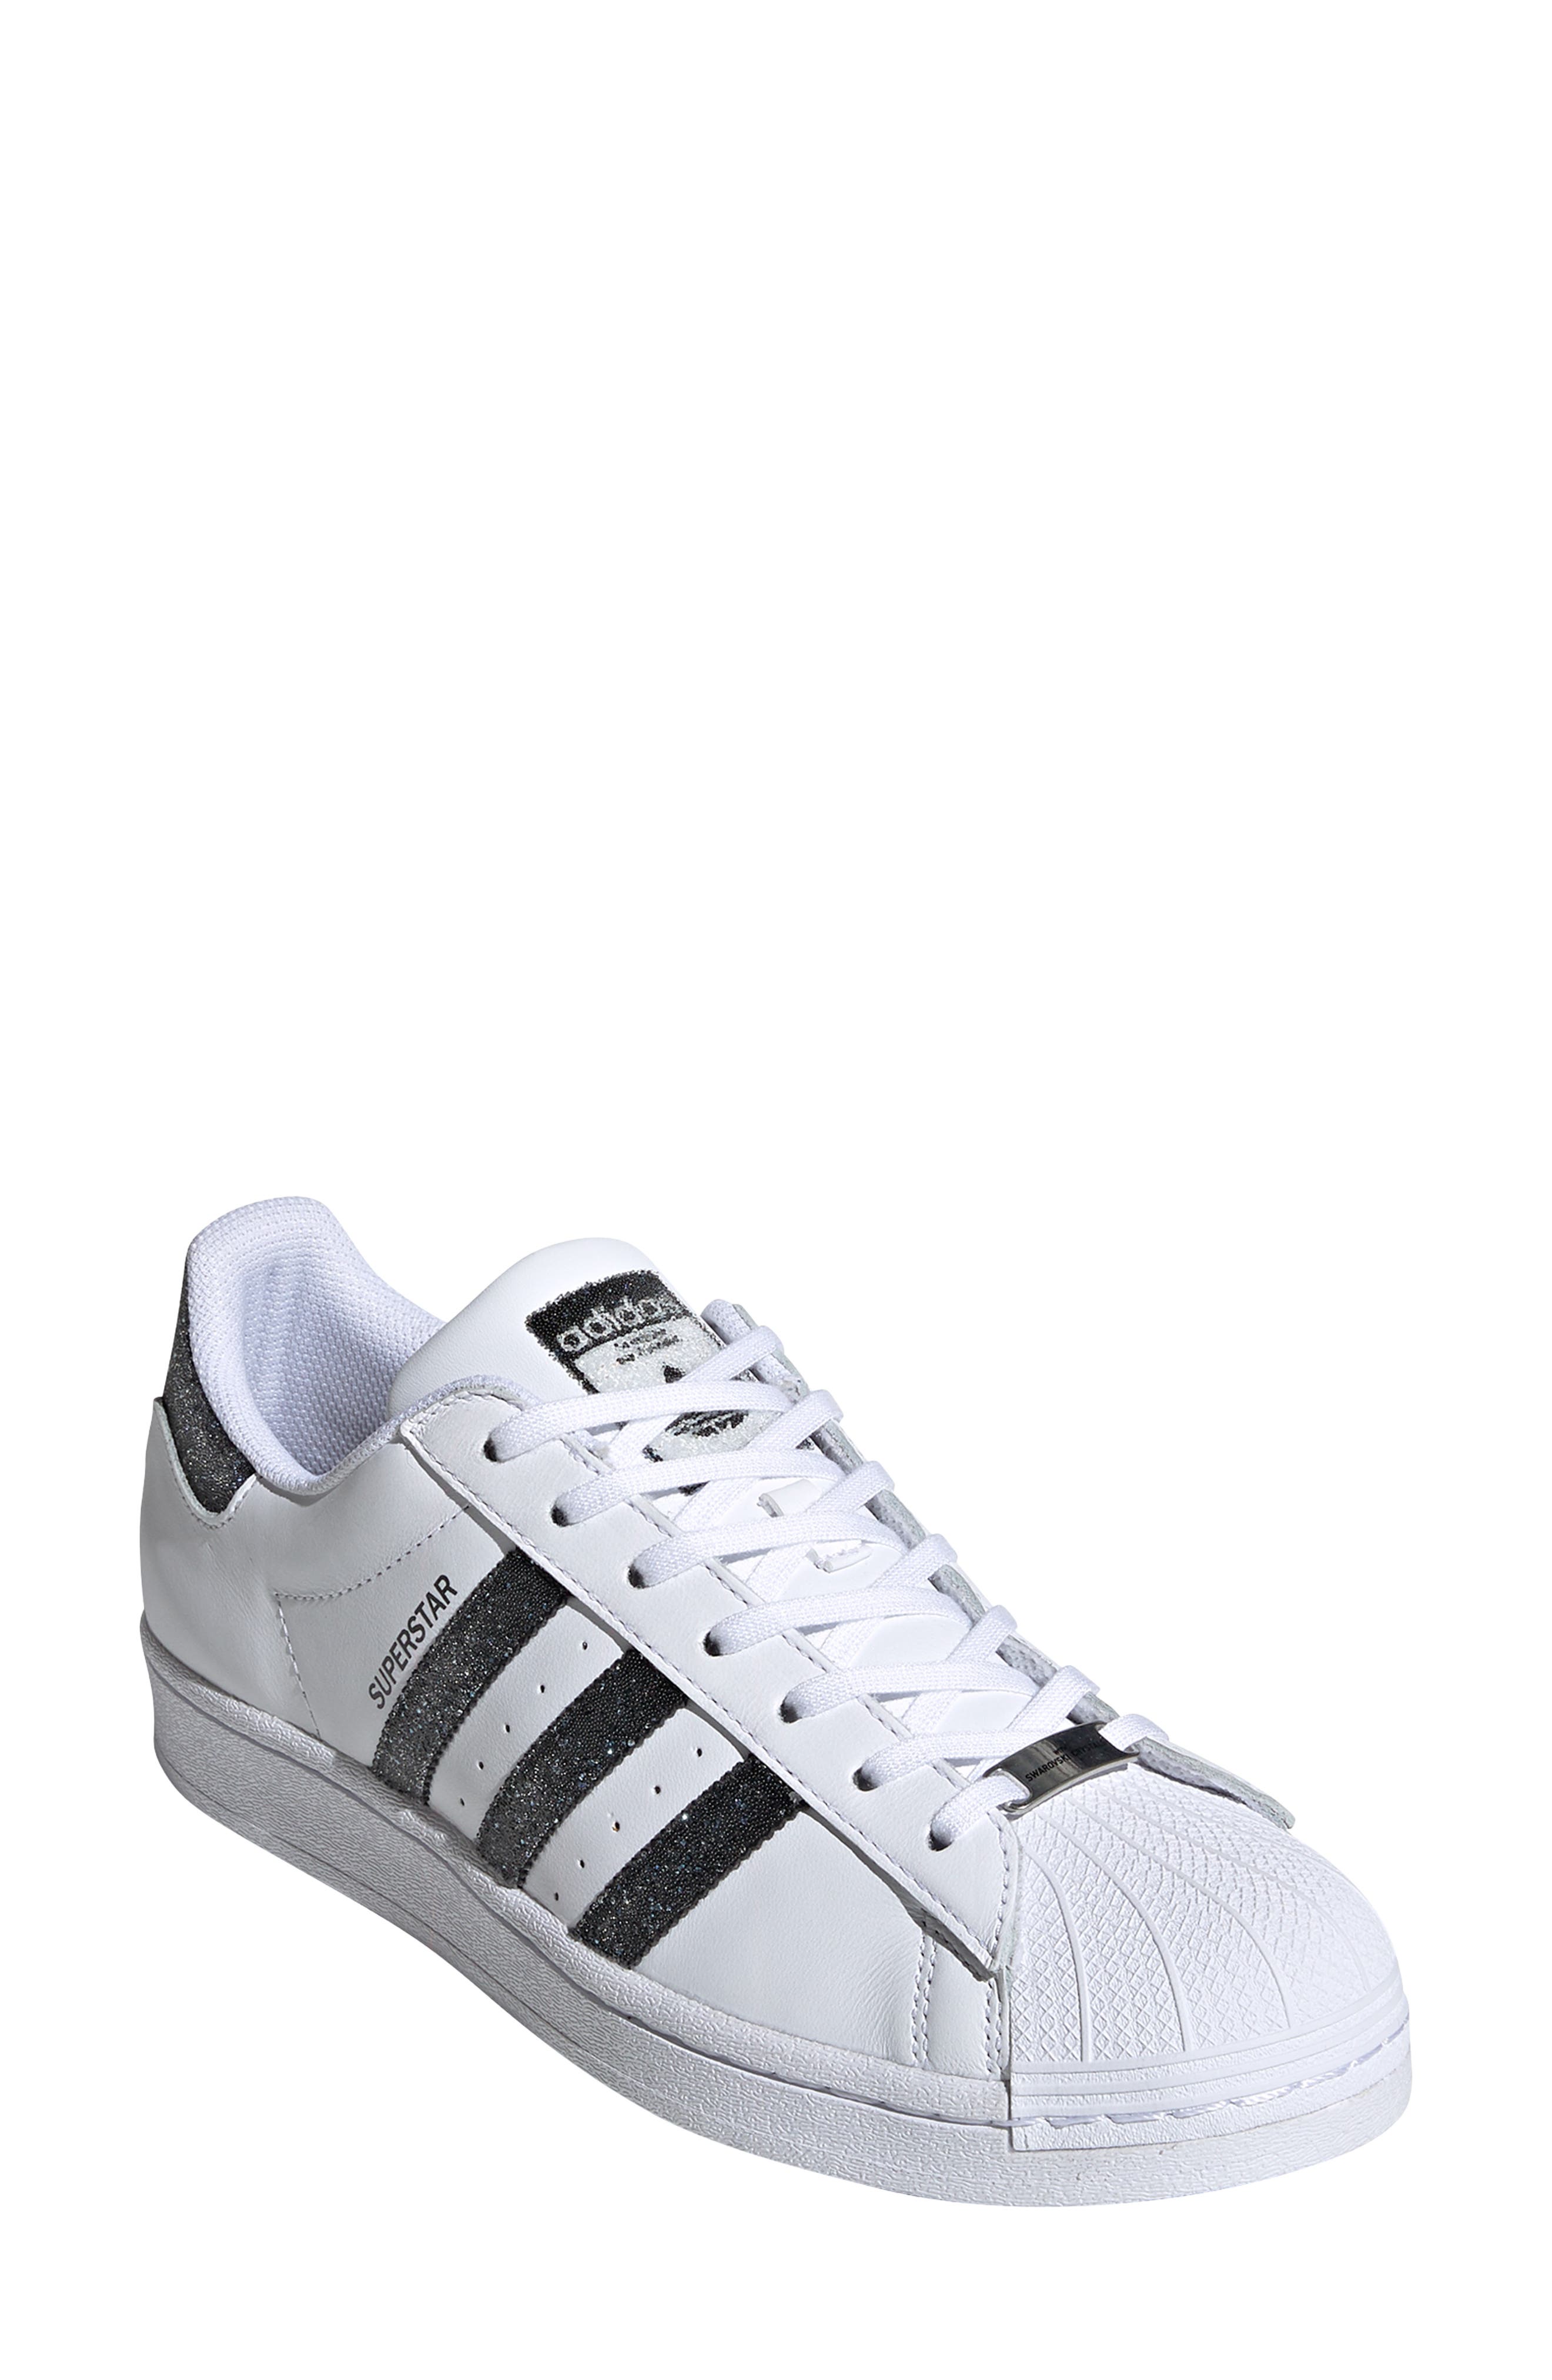 nordstrom adidas shoes